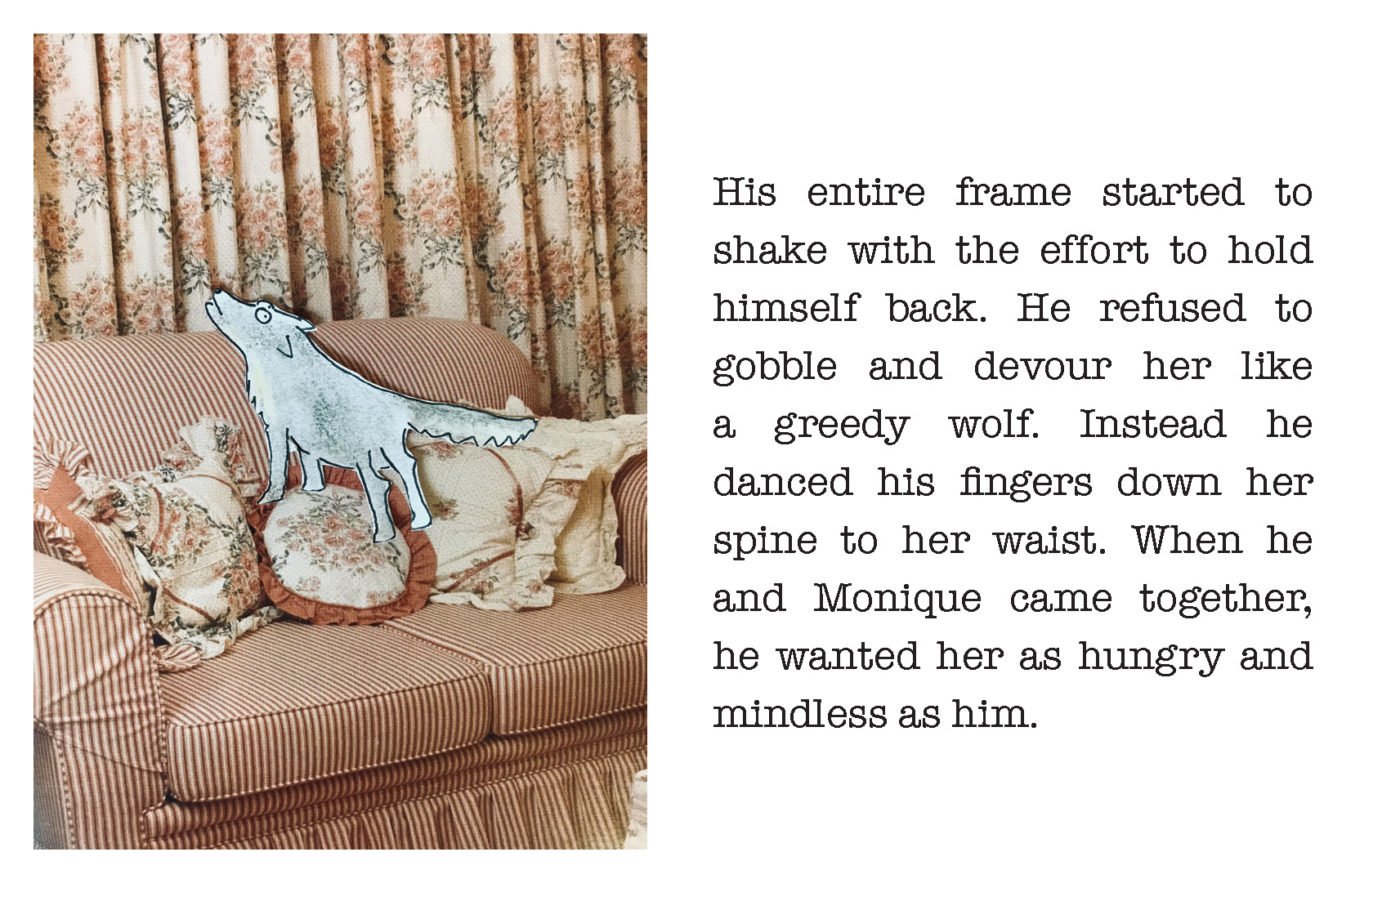 Mix media image of cartoon wolf standing on a couch. Text next to the image reads "His entire frame started to shake with the effort to hold himself back. He refused to gobble and devour her like a greedy wolf. Instead he danced his fingers down her spine to her waist. When he and Monique came together, he wanted her as hungry and mindless as him."